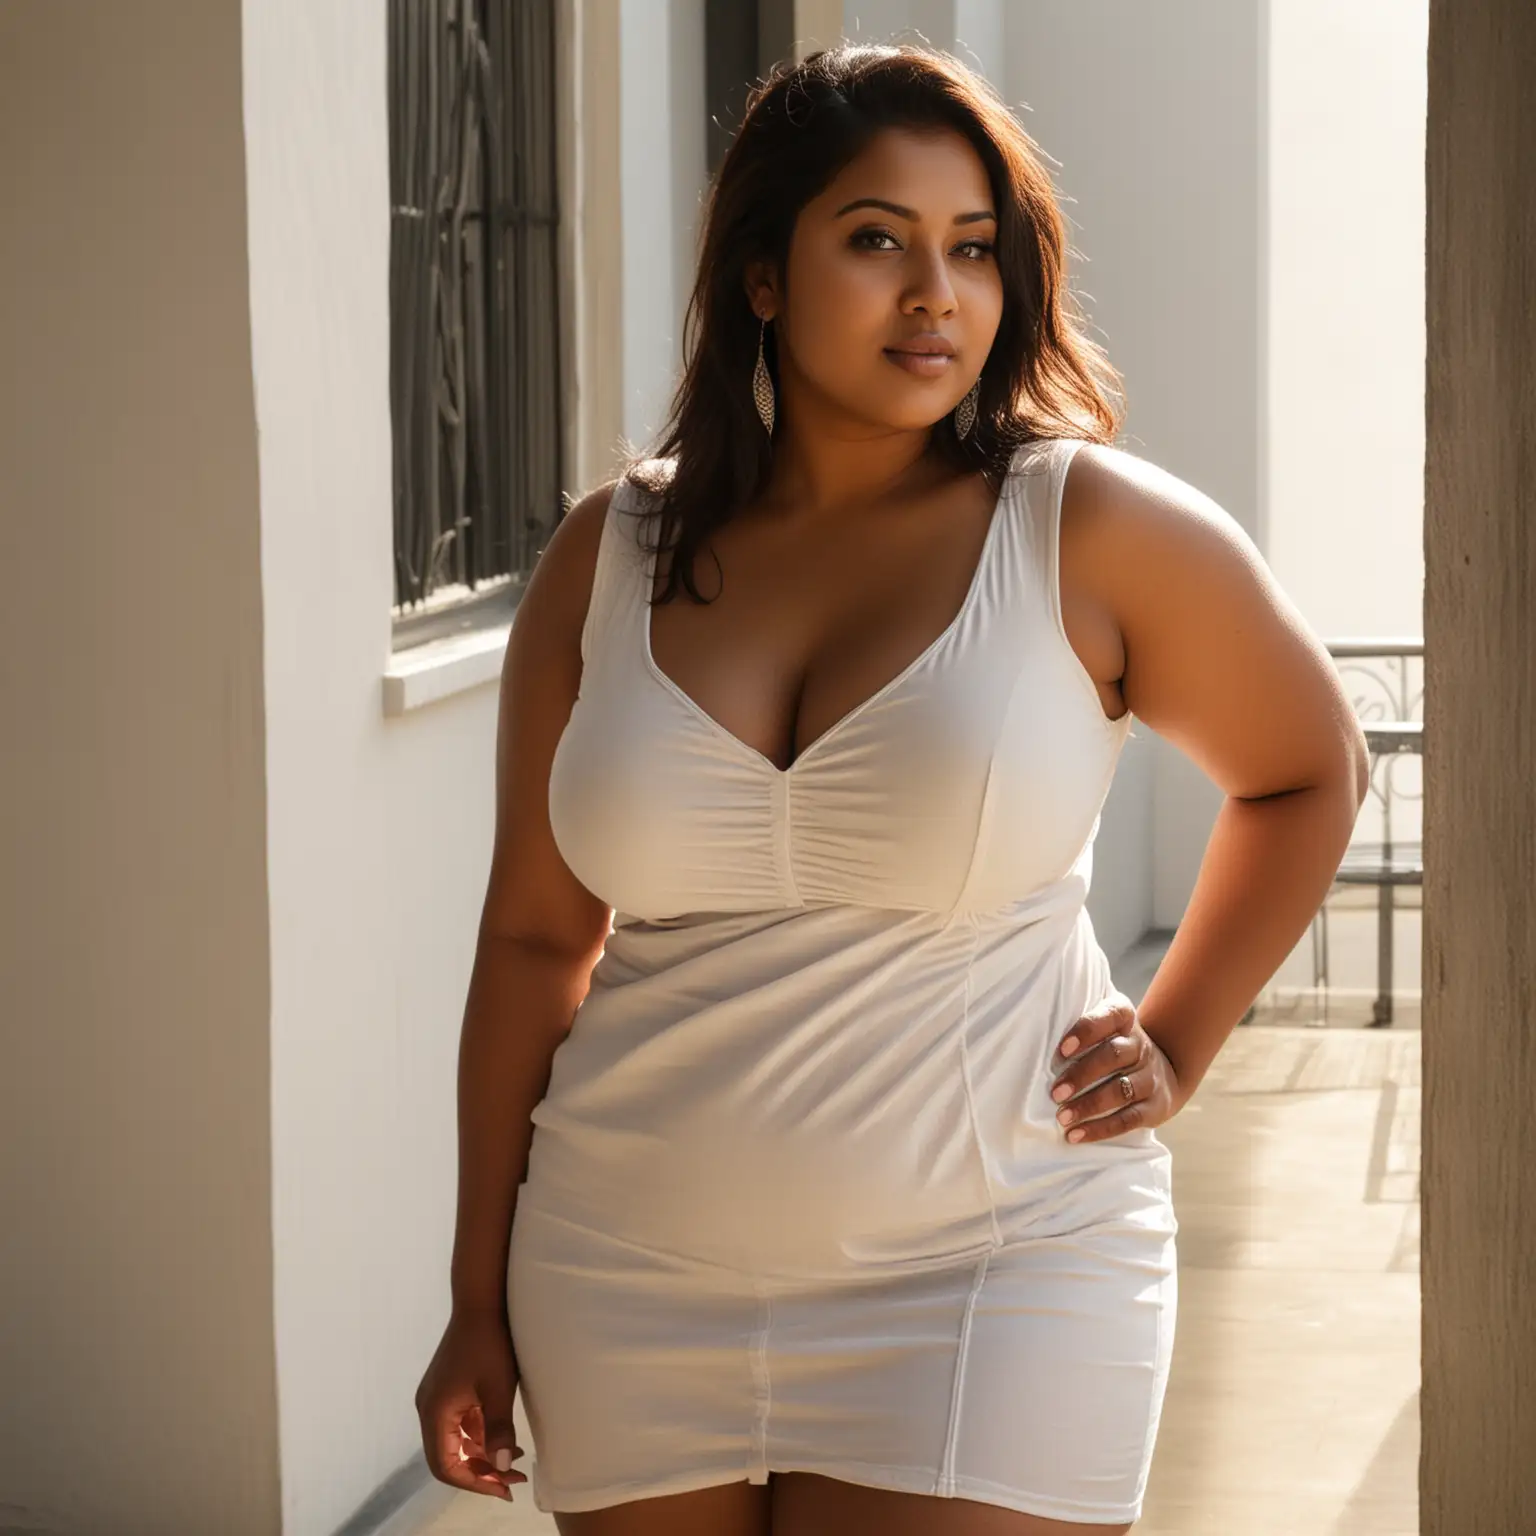 A stunningly sexy Bangladeshi BBW woman, with a curvy figure and a chubby waist, standing almost fully nude in the courtyard of a Penthouse. She's in a very sexy sleeveless blouse that accentuates her curves.  The sunlight casts dappled shadows across her skin, highlighting her beauty.